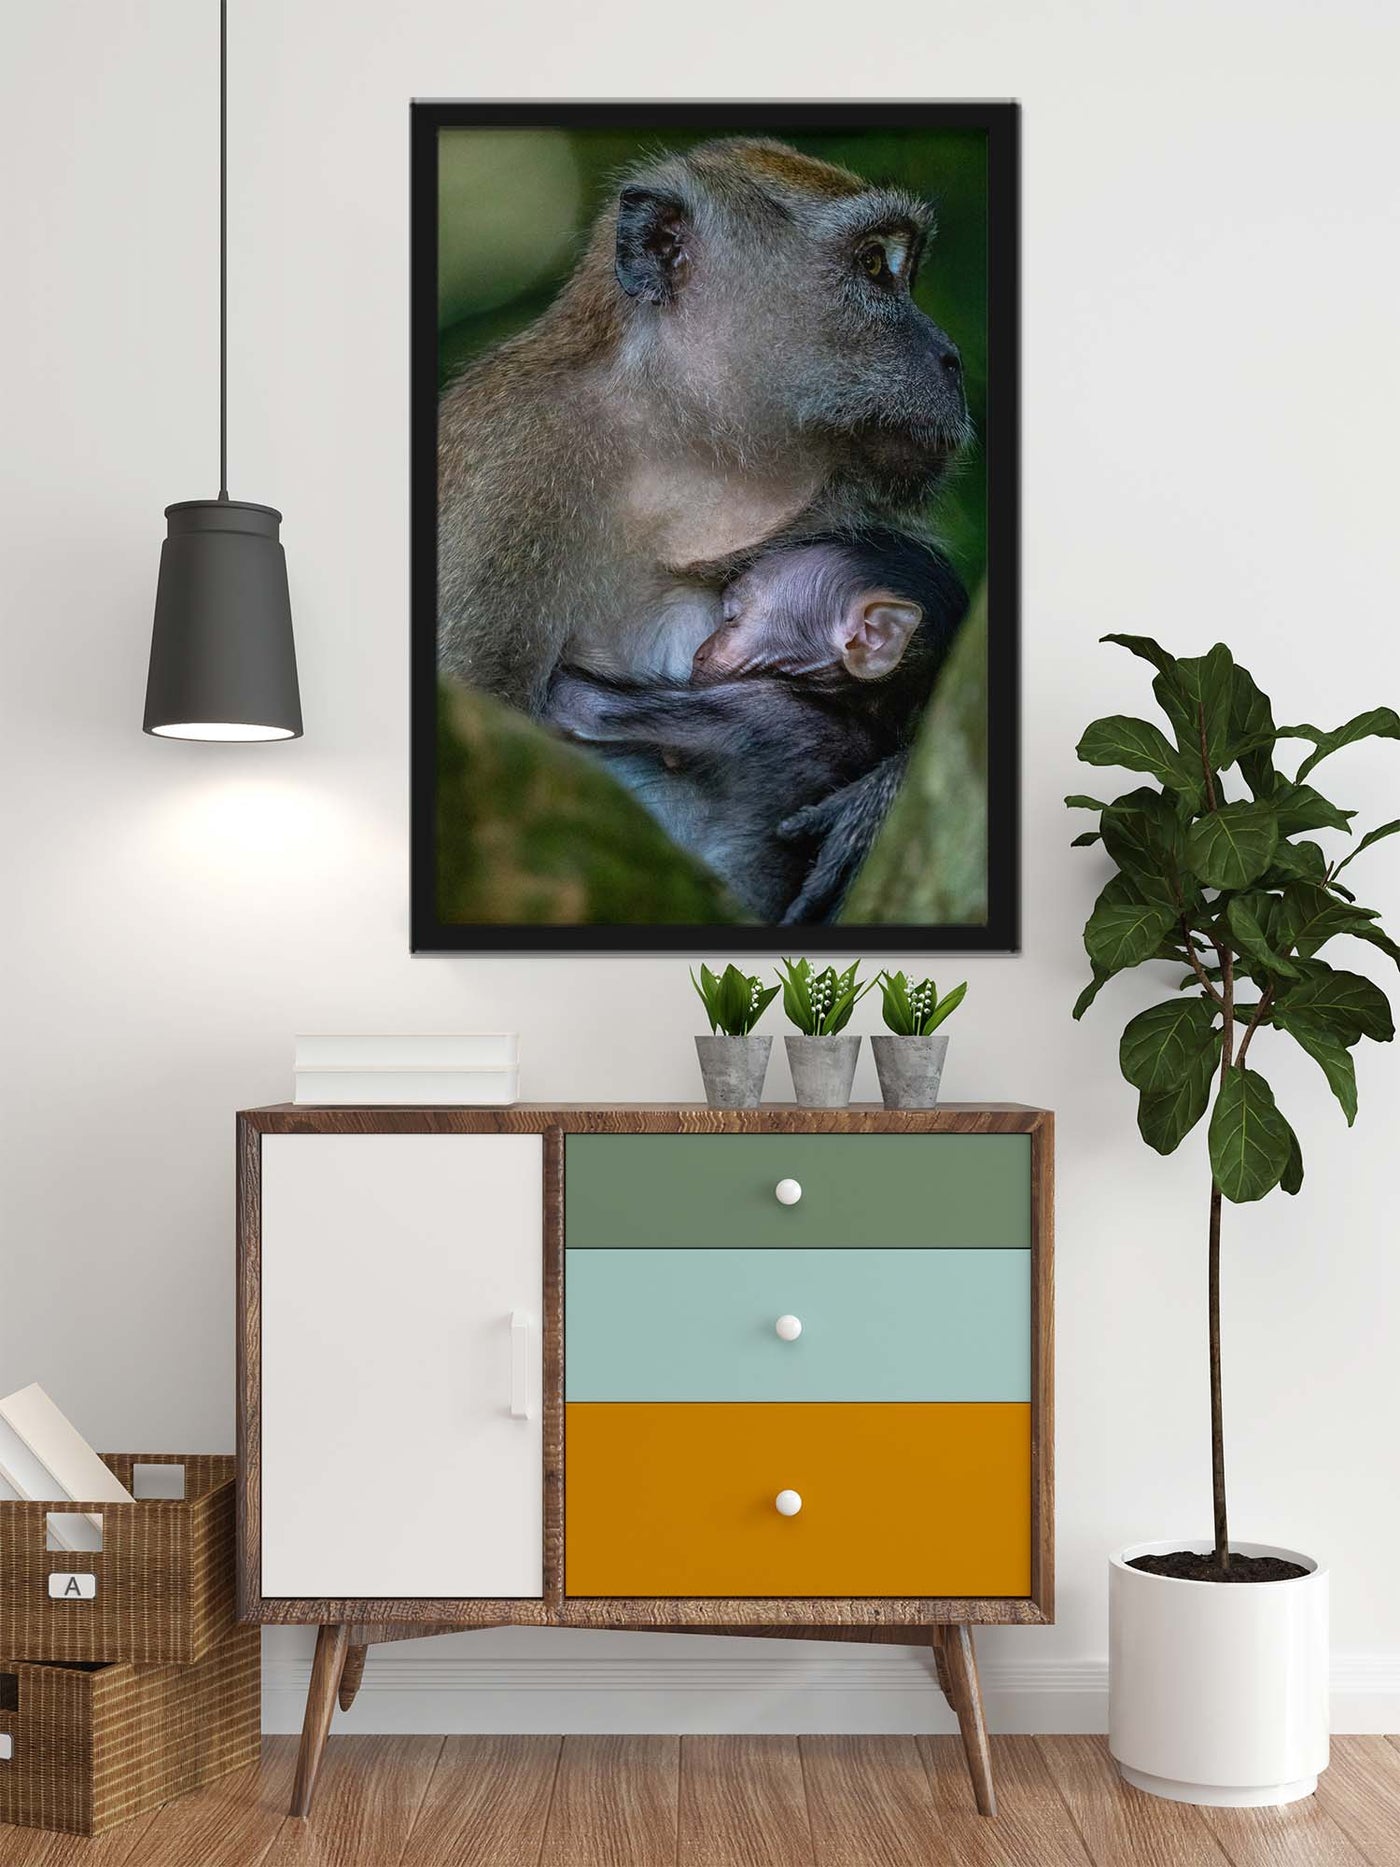 Long Tailed Macaque Cuddle Baby (Framed Prints)